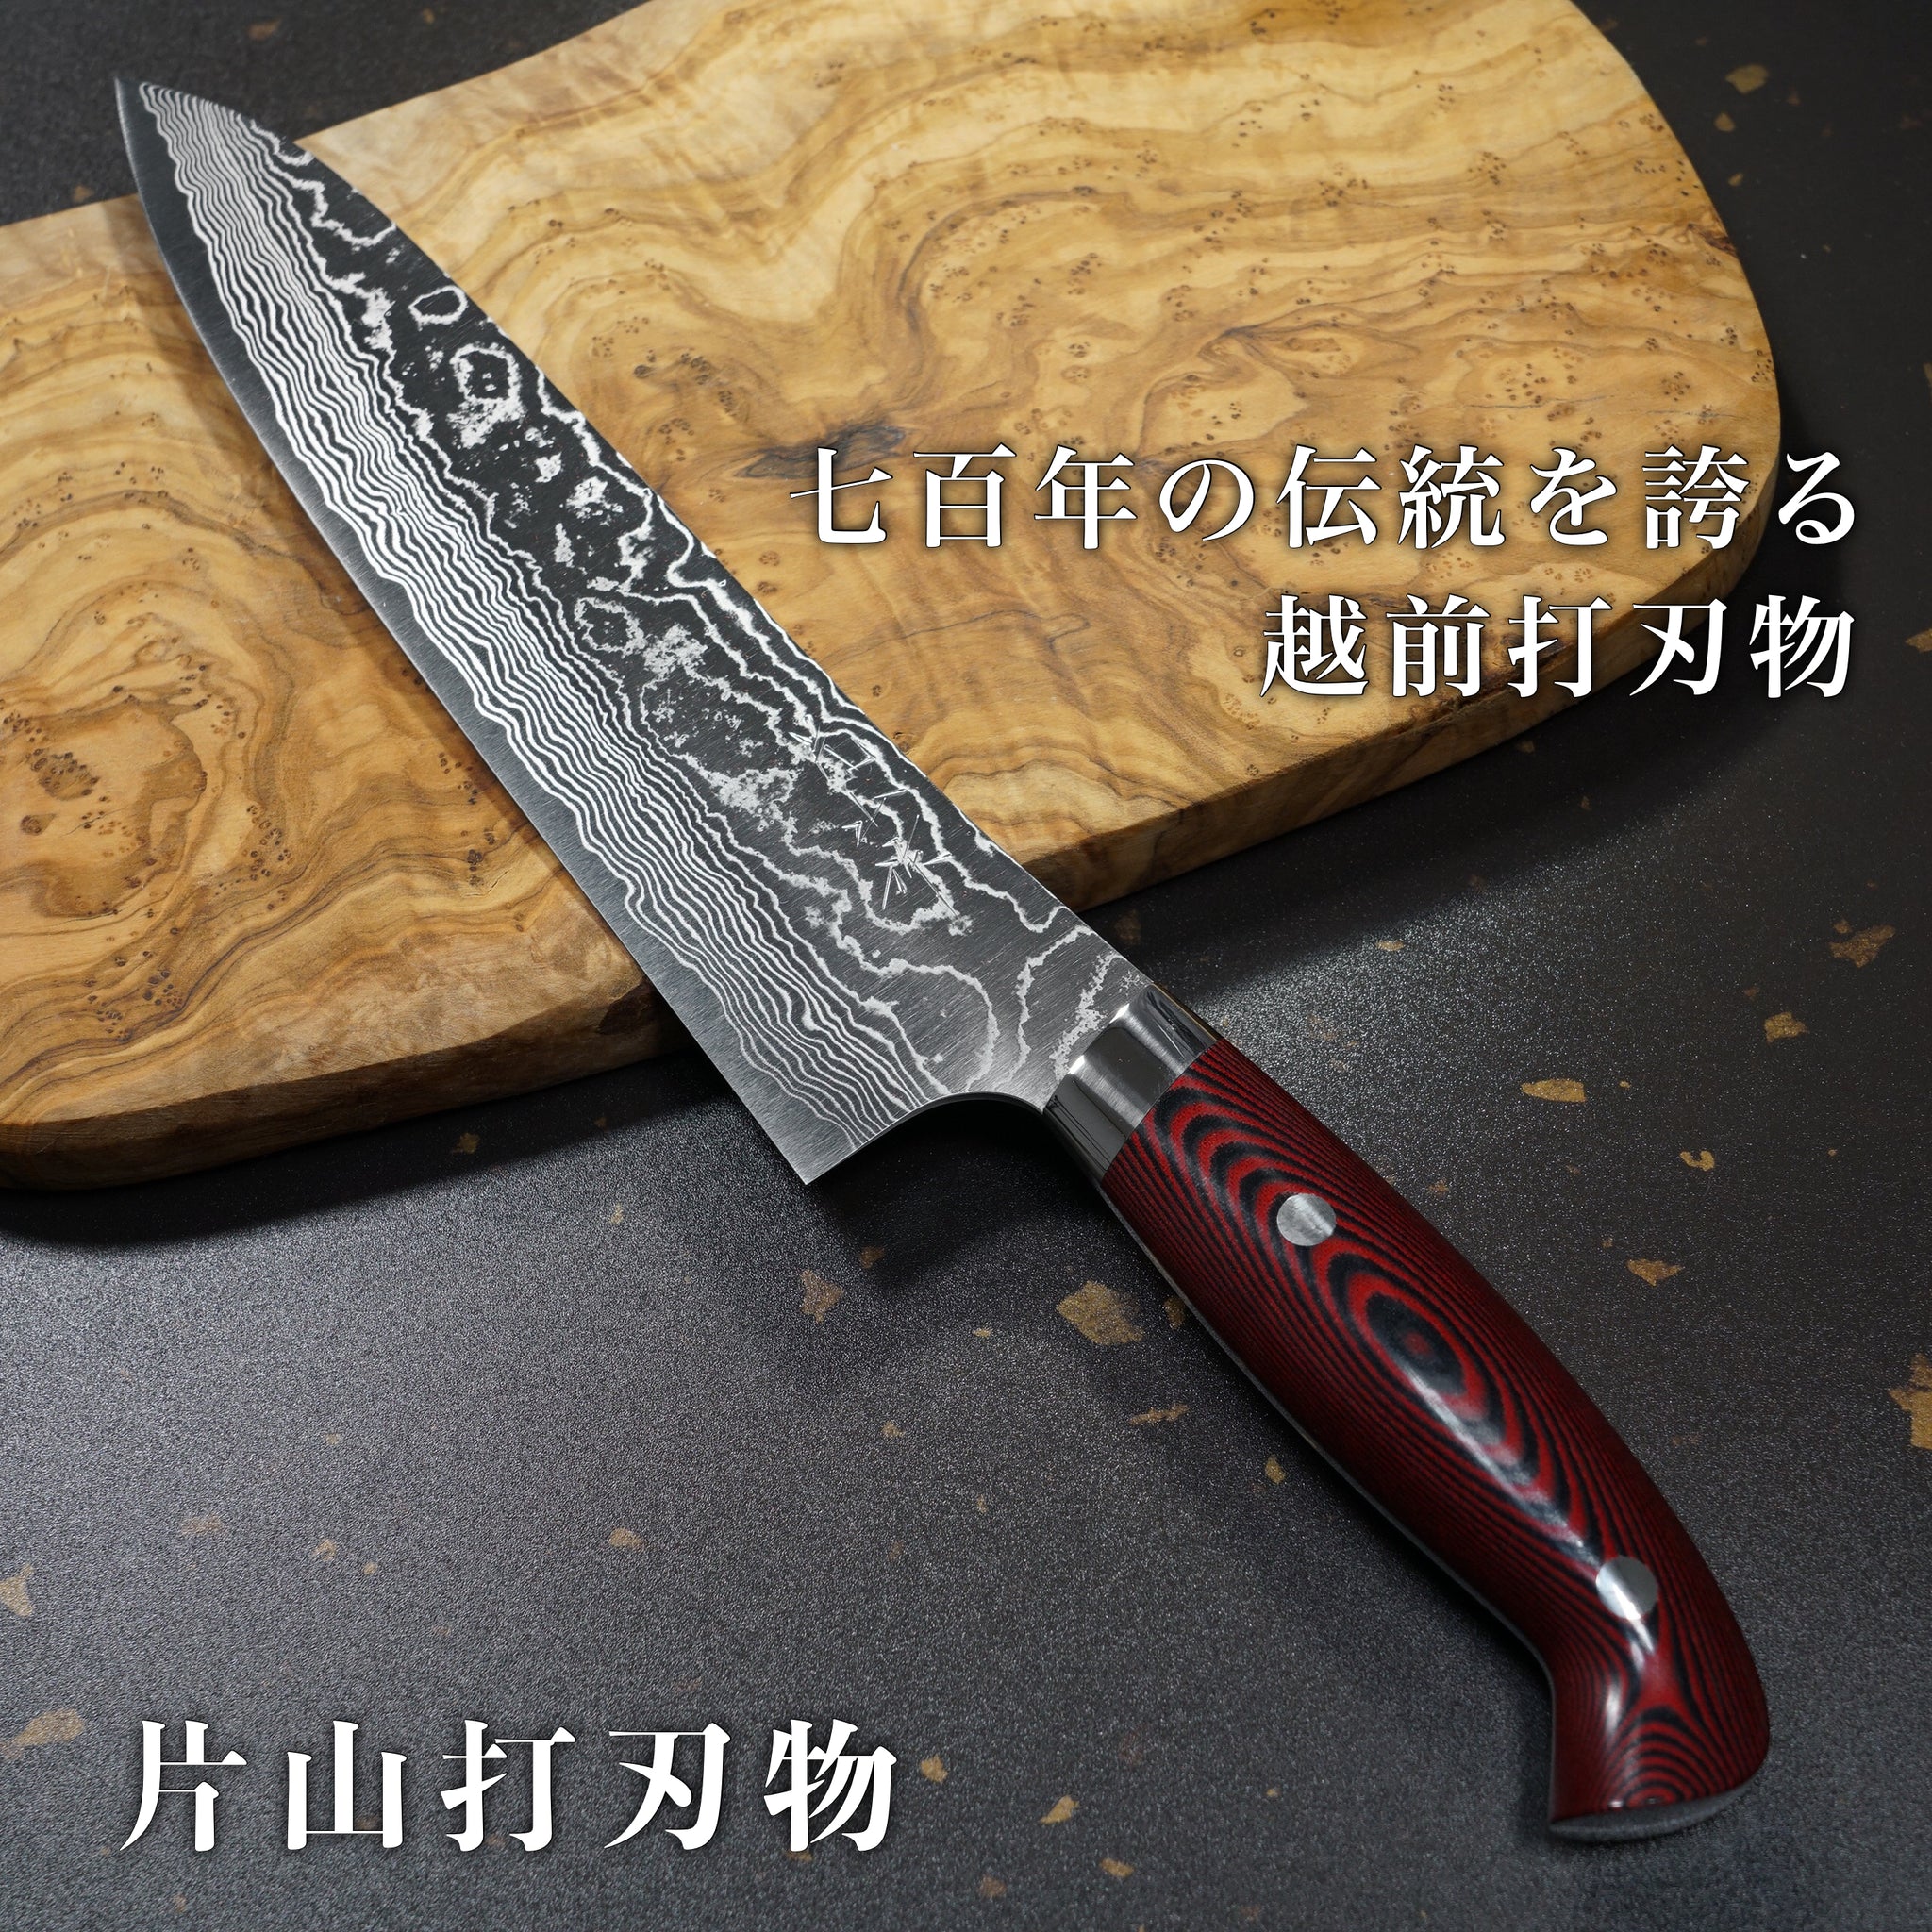 KIYOTSUNA Chef Kitchen ALL Stainless Forged,Multi-use Food